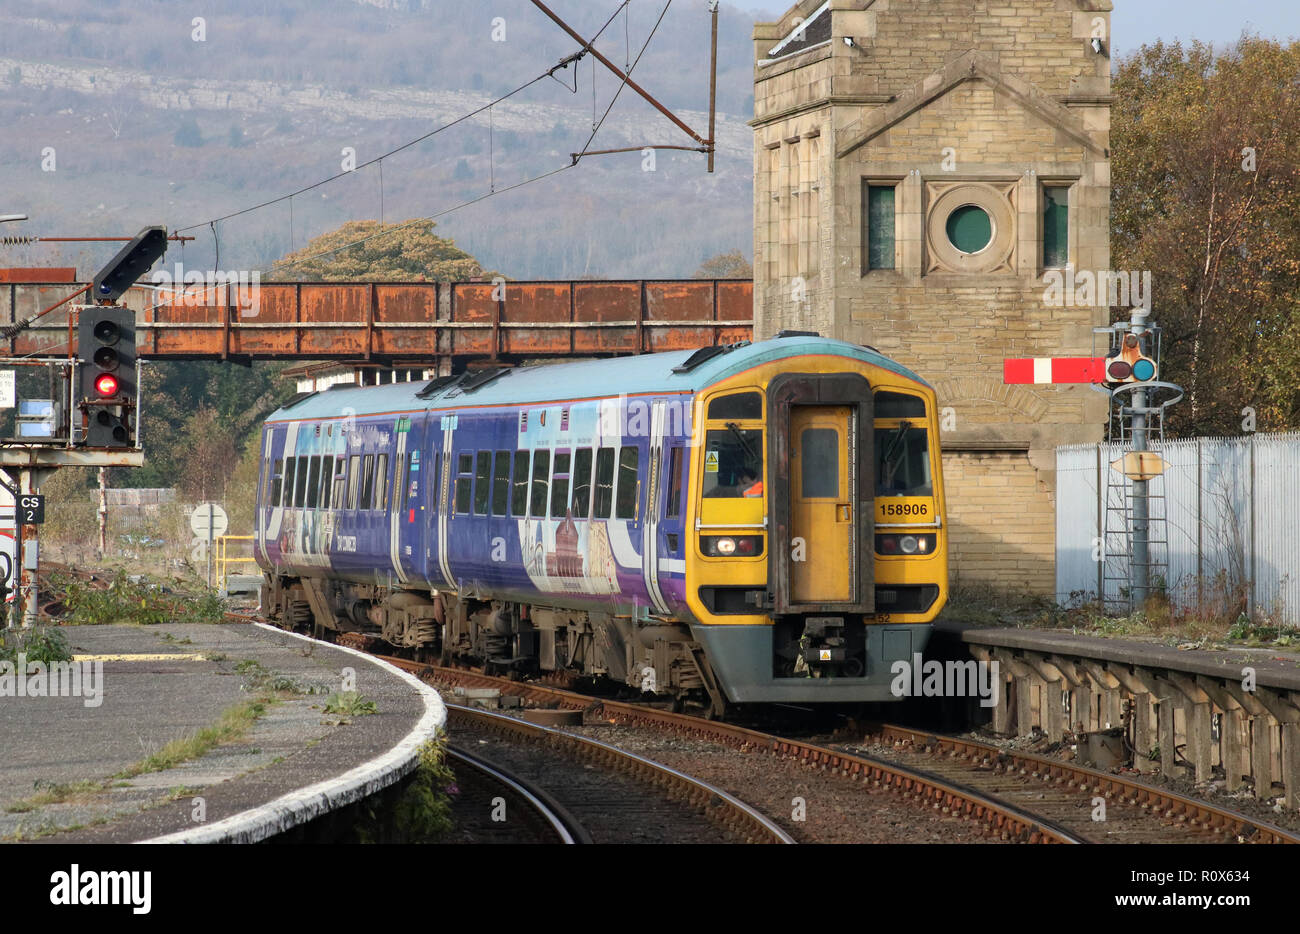 Class 158 diesel multiple unit train, operated by Northern trains, arriving at Carnforth railway station with a passenger service on 5th November 2018 Stock Photo